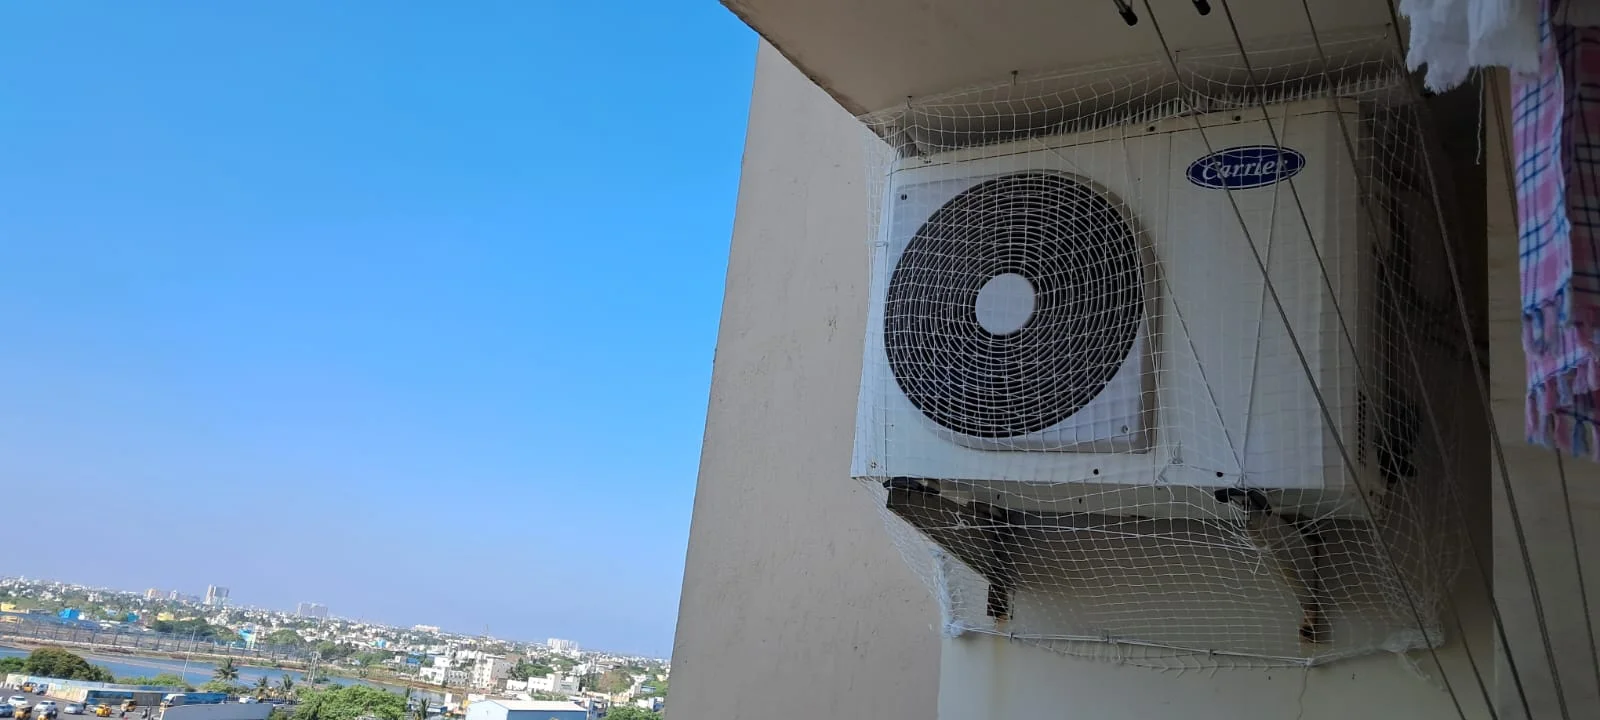 solution for pigeon issues